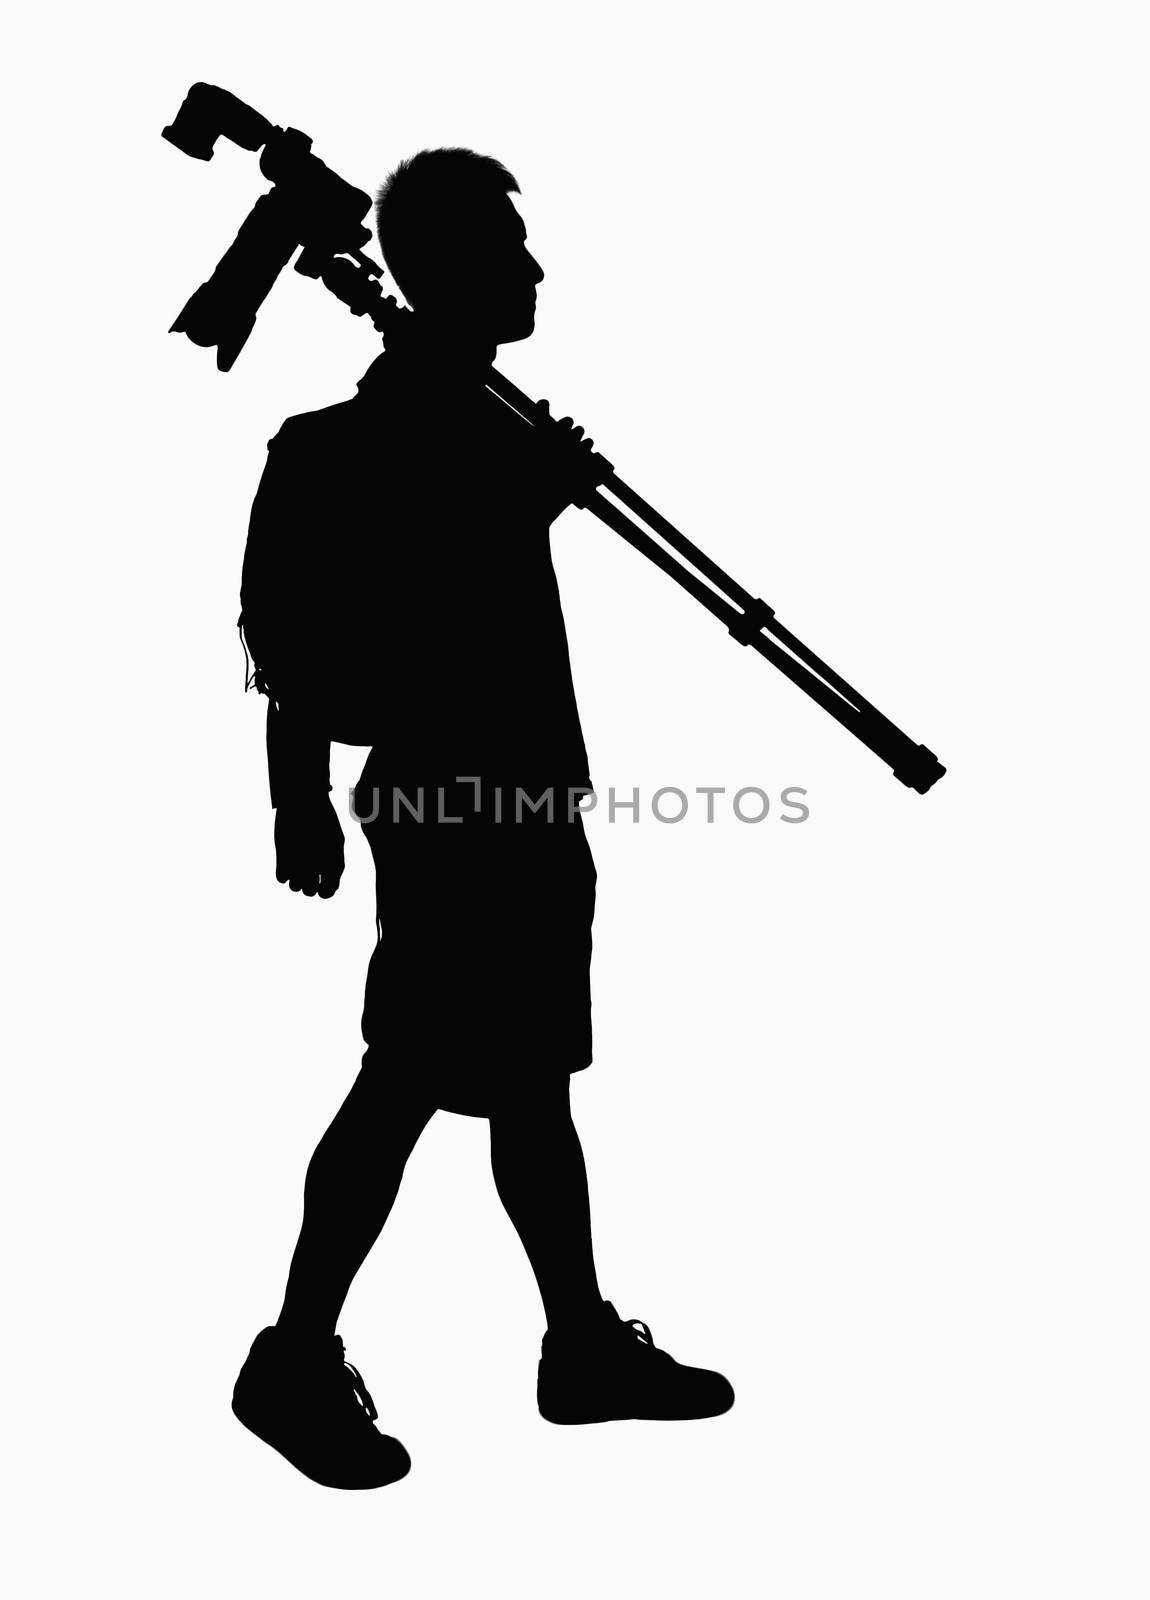 Silhouette of man carrying camera and tripod.